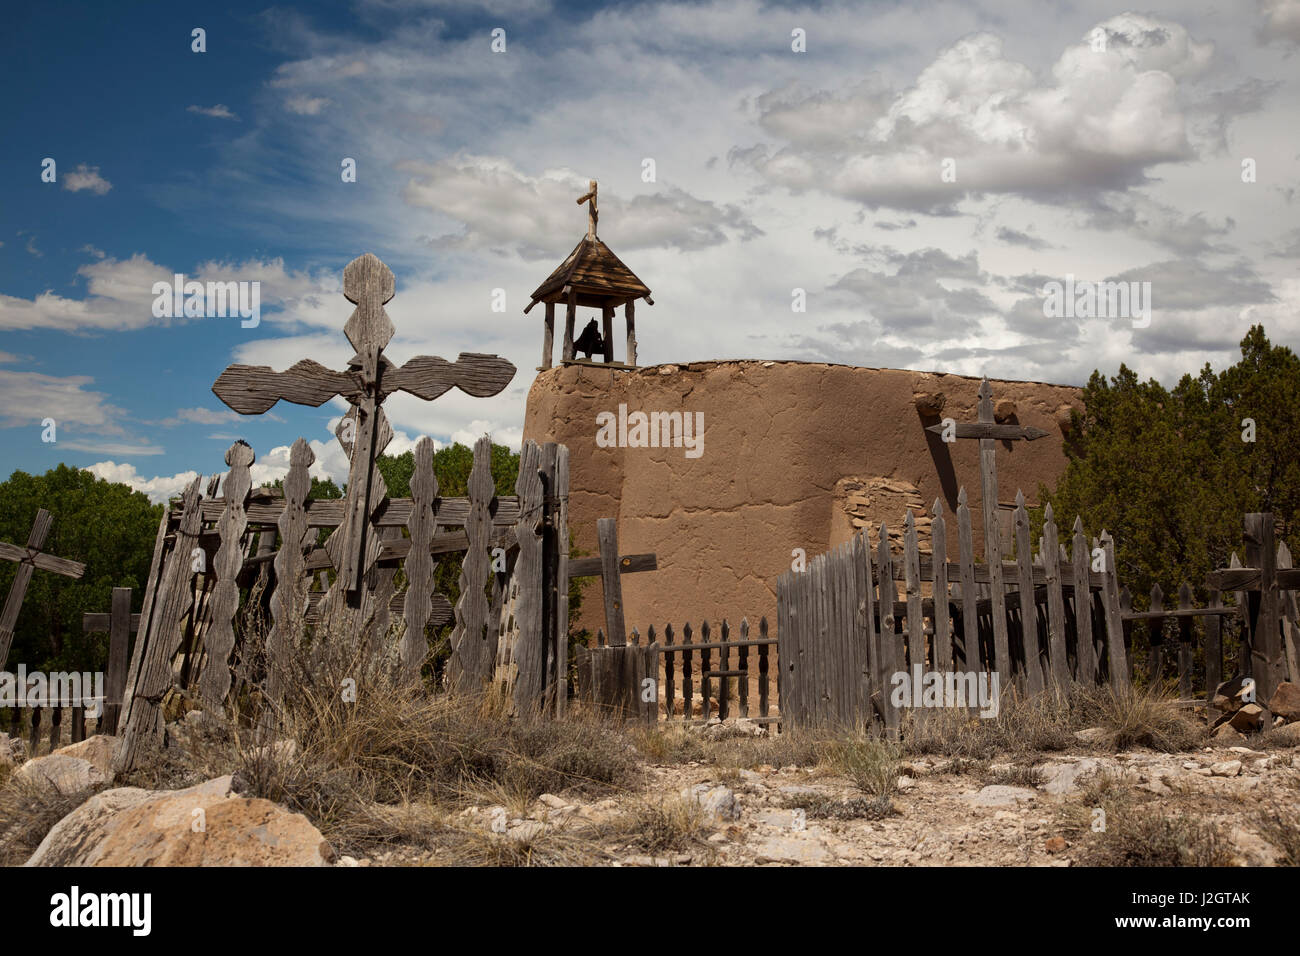 Adobe brick church and graveyard used by Spanish settlers in the early 1700's New Mexico by Spanish settlers. El Rancho de las Golondrinas (Ranch of the Swallows) is located in a rural farming valley near Santa Fe. Stock Photo